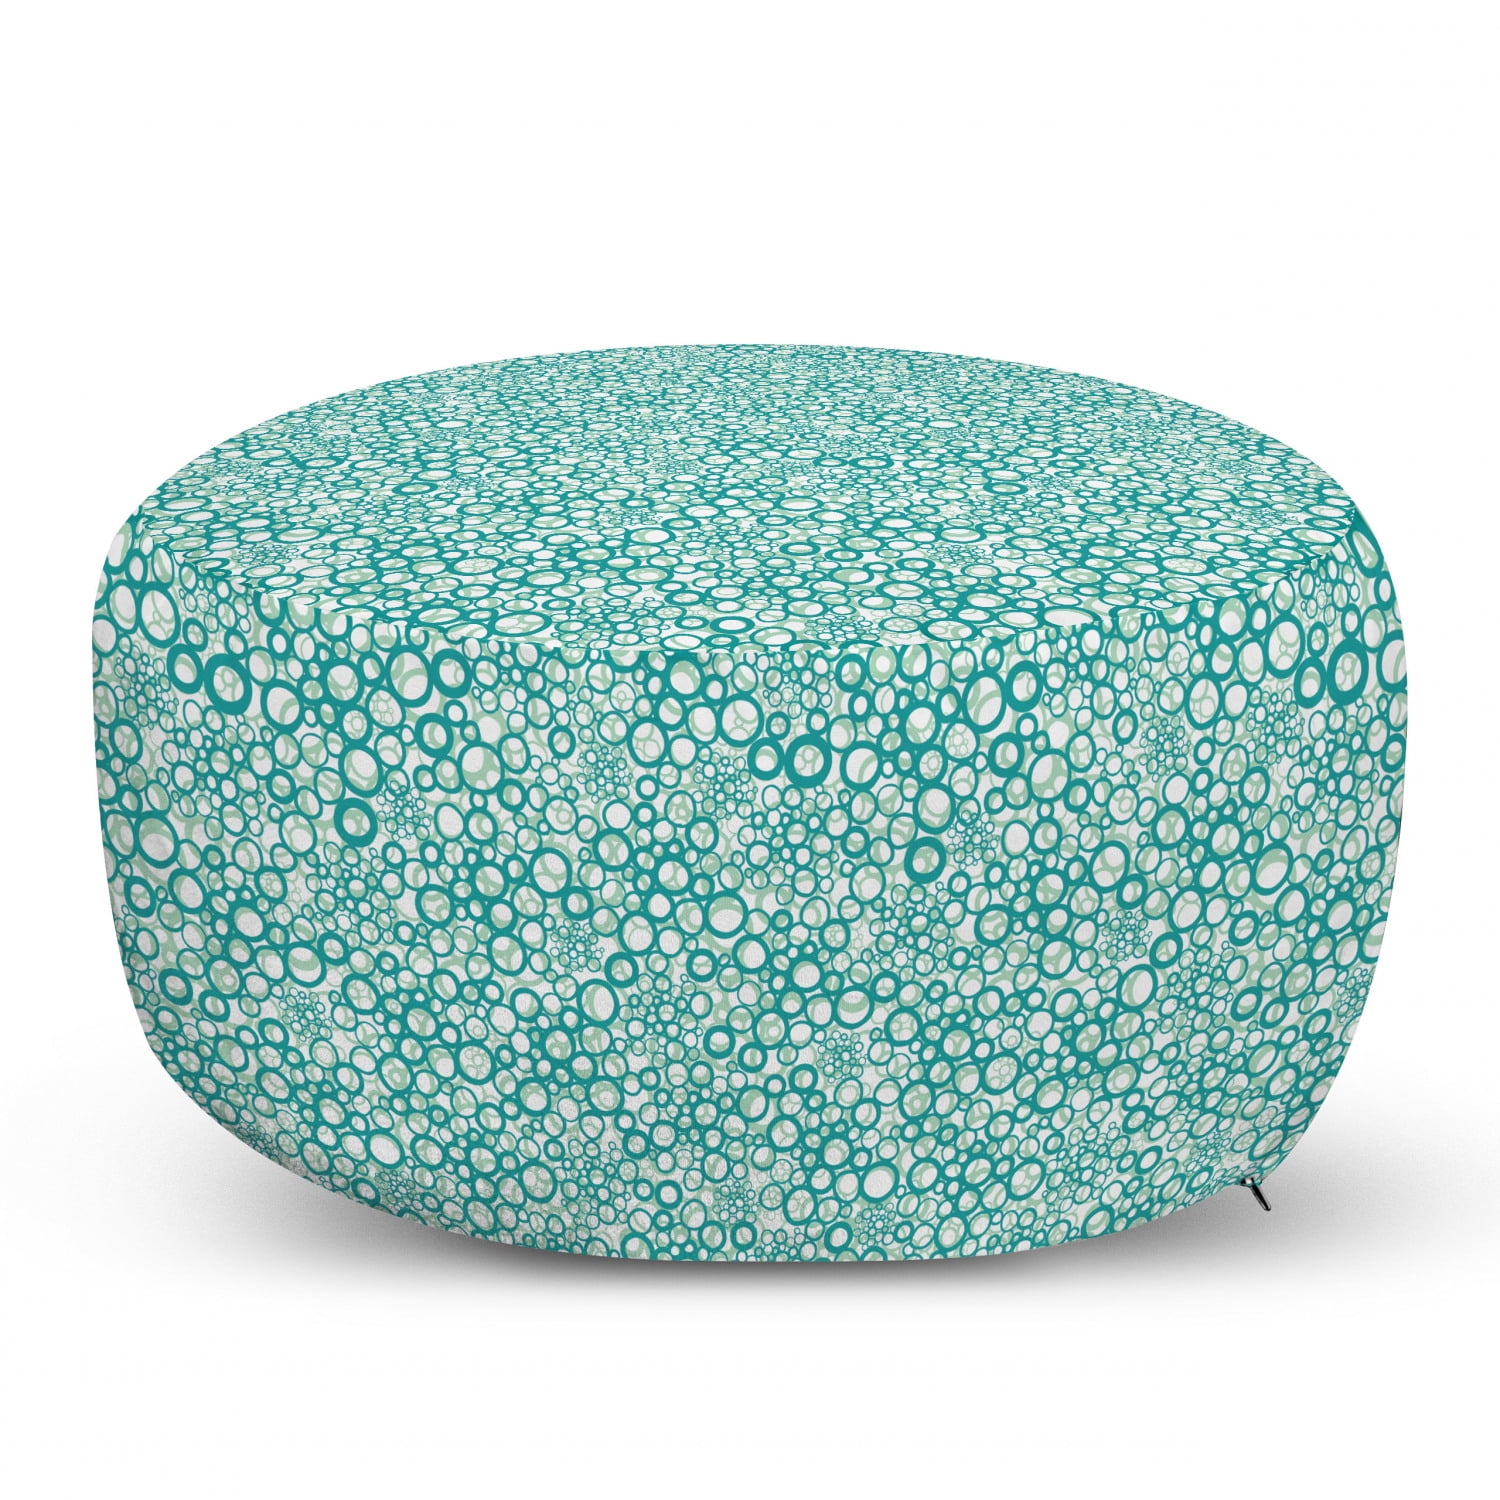 Restuffing a Deflated Pouf in 8 steps (and adding a zipper!) — somerstems.